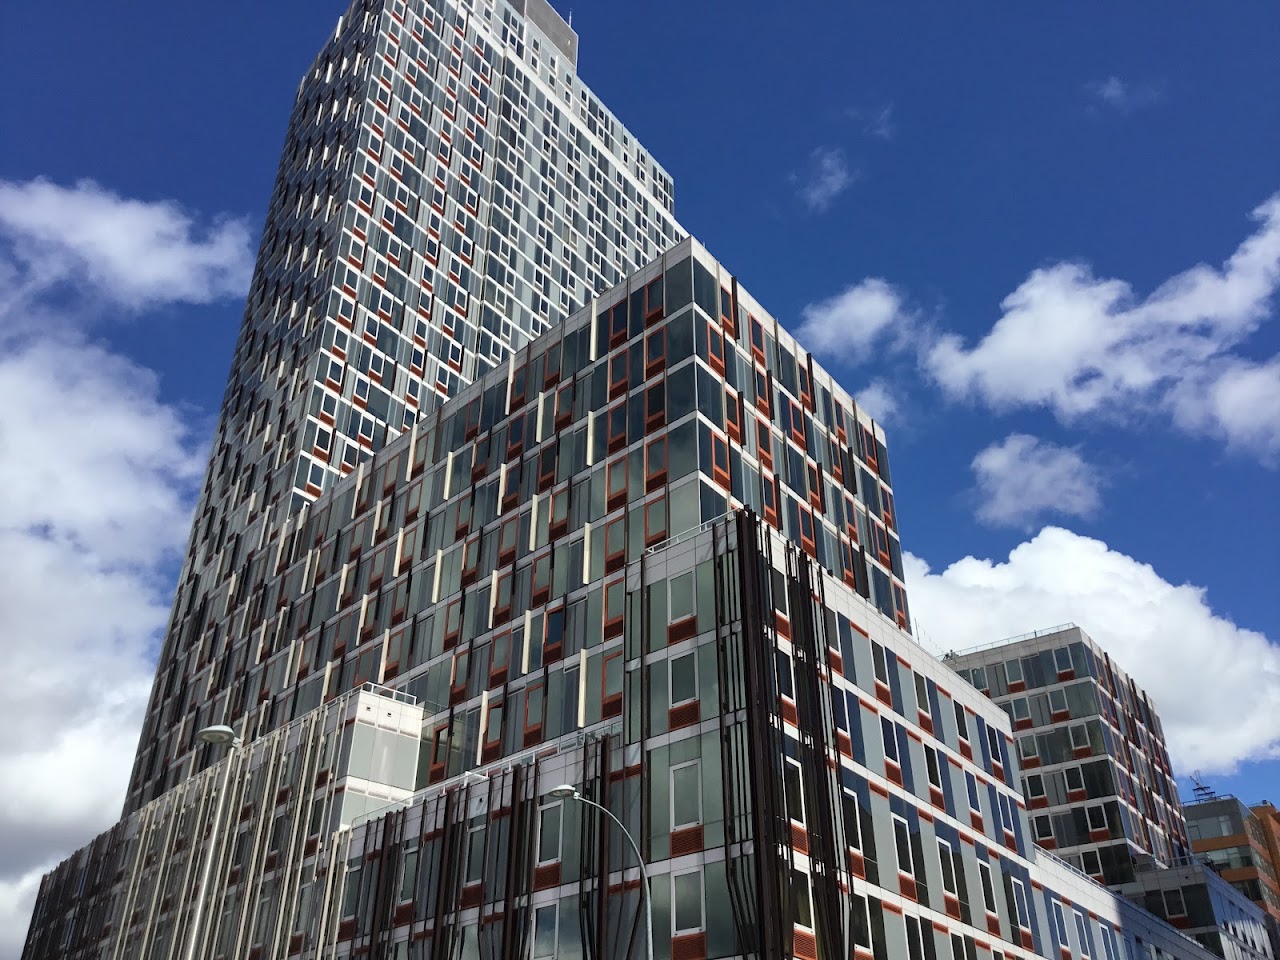 Photo of HUNTER S POINT SOUTH B. Affordable housing located at 1-55 BORDEN AVENUE LONG ISLAND CITY, NY 11101